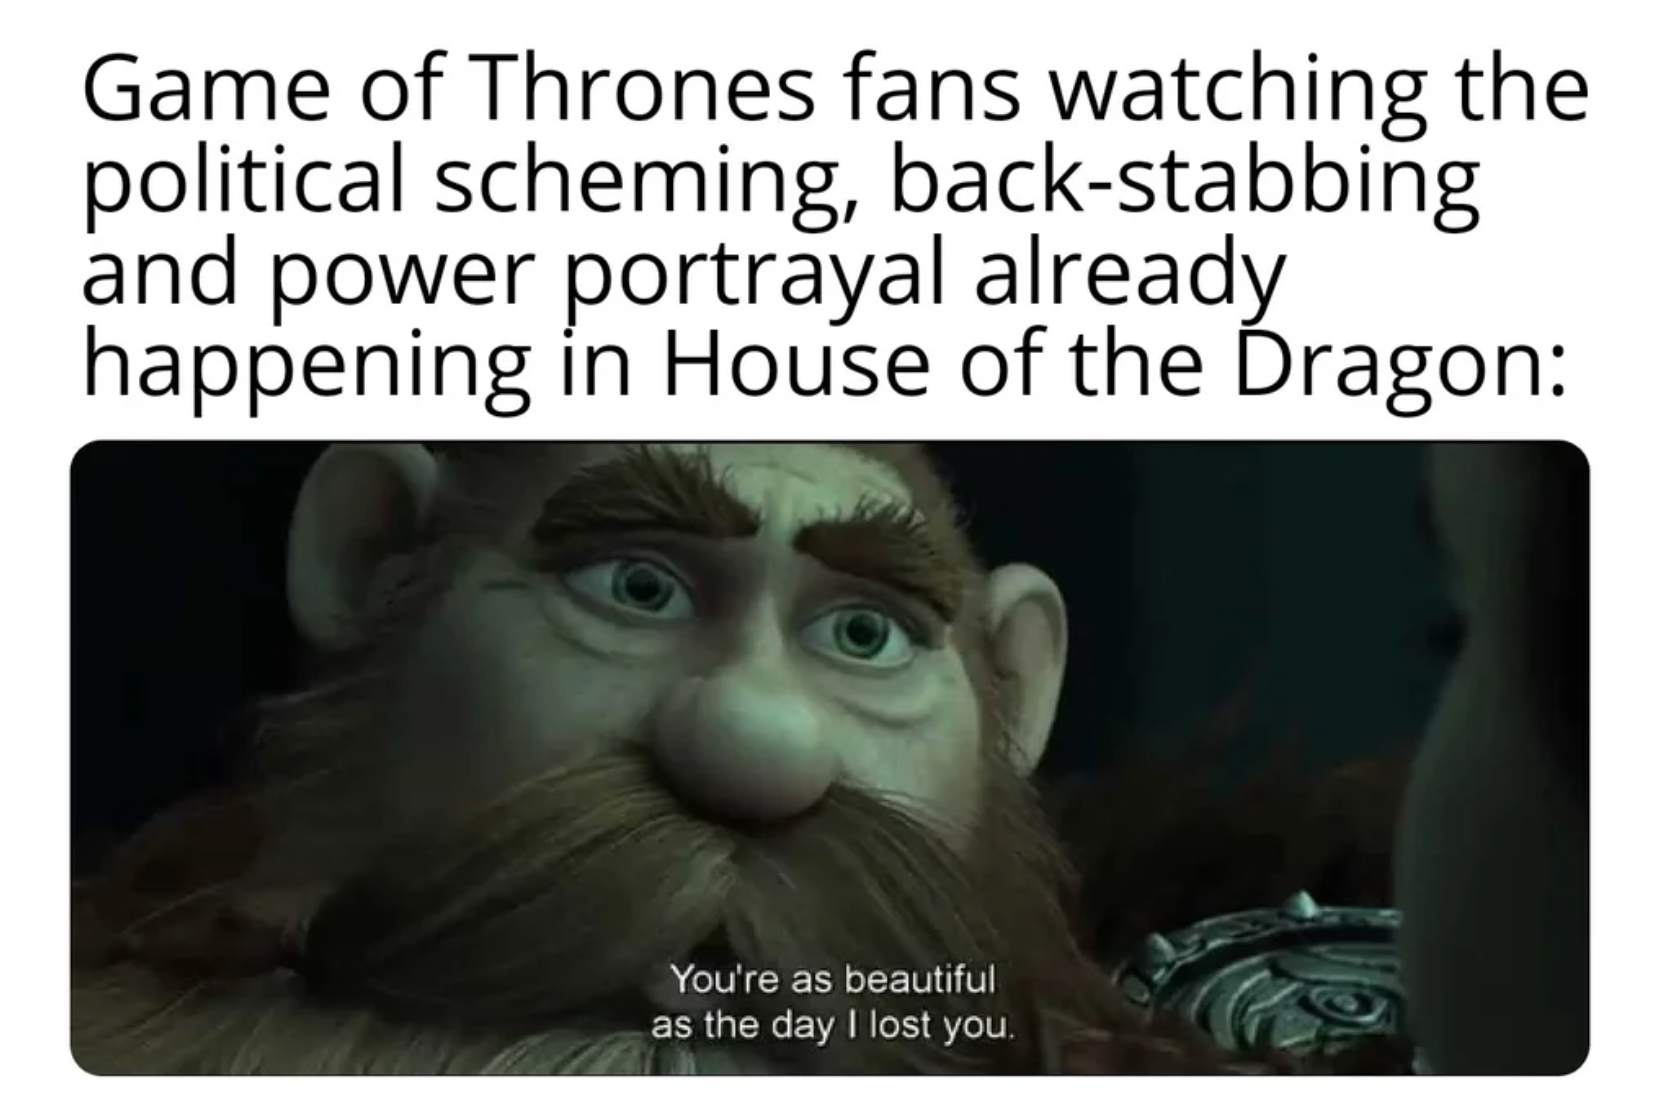 House of the Dragon Episode 2 memes - gigtforeningen - Game of Thrones fans watching the political scheming, backstabbing and power portrayal already happening in House of the Dragon You're as beautiful as the day I lost you.